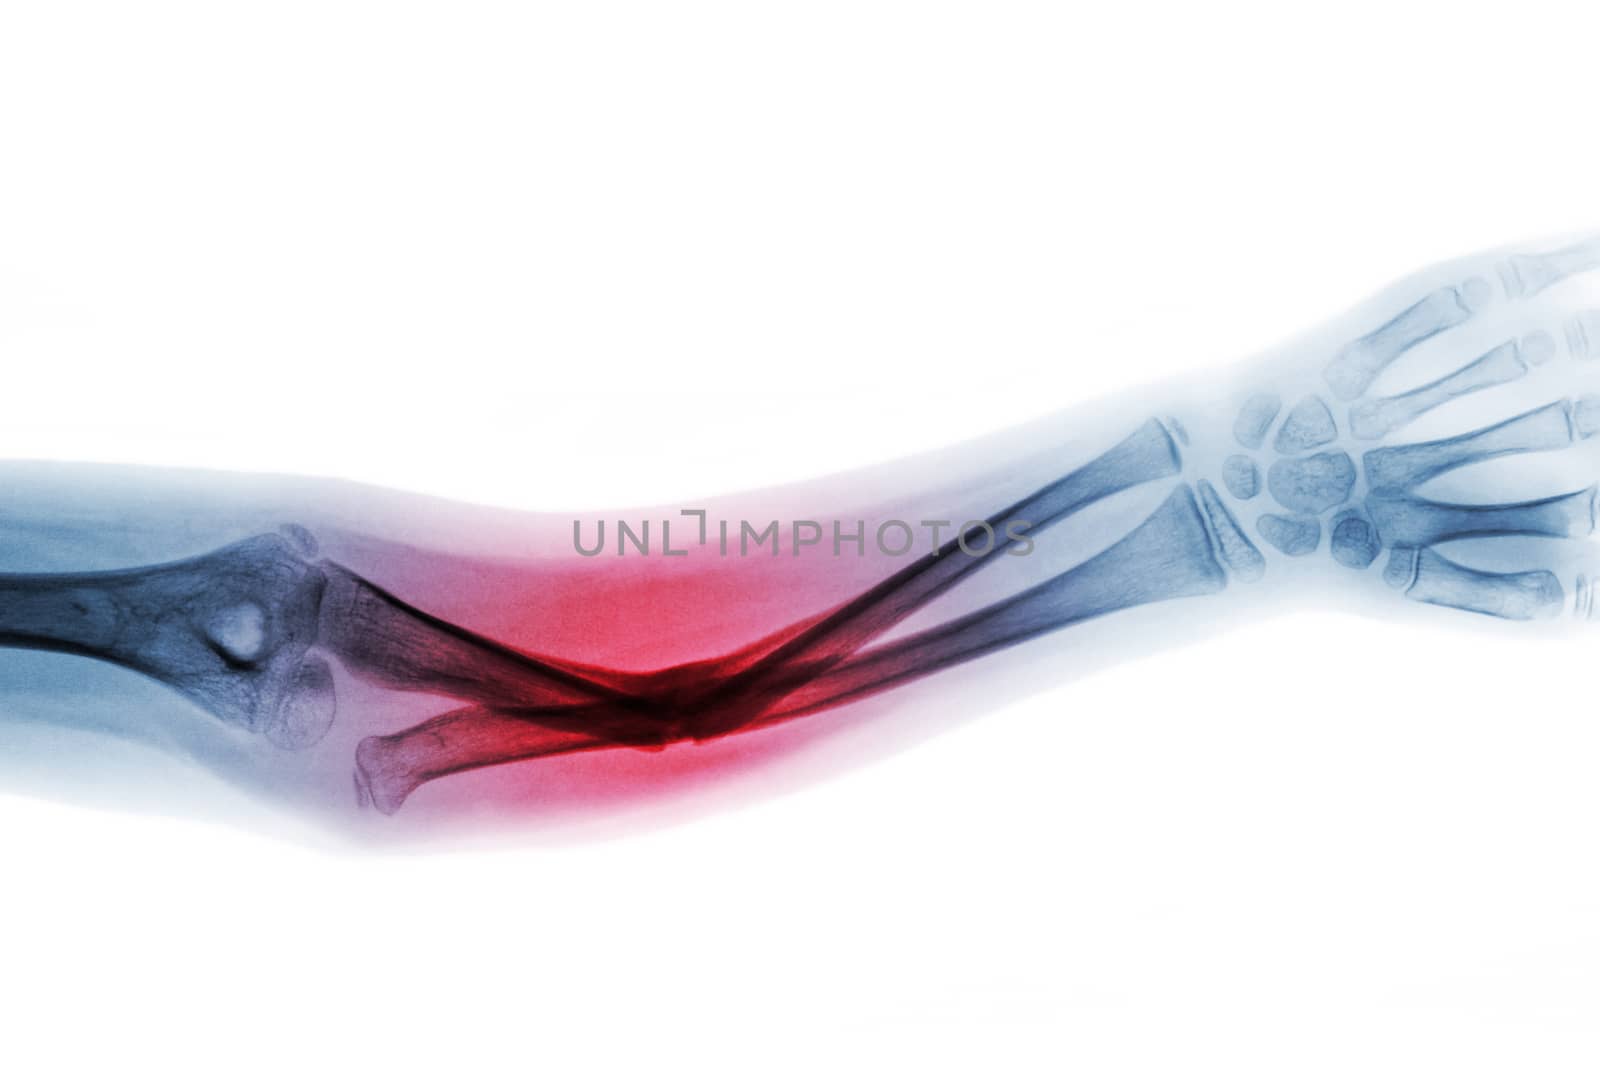 Film x-ray forearm AP show fracture shaft of ulnar bone by stockdevil